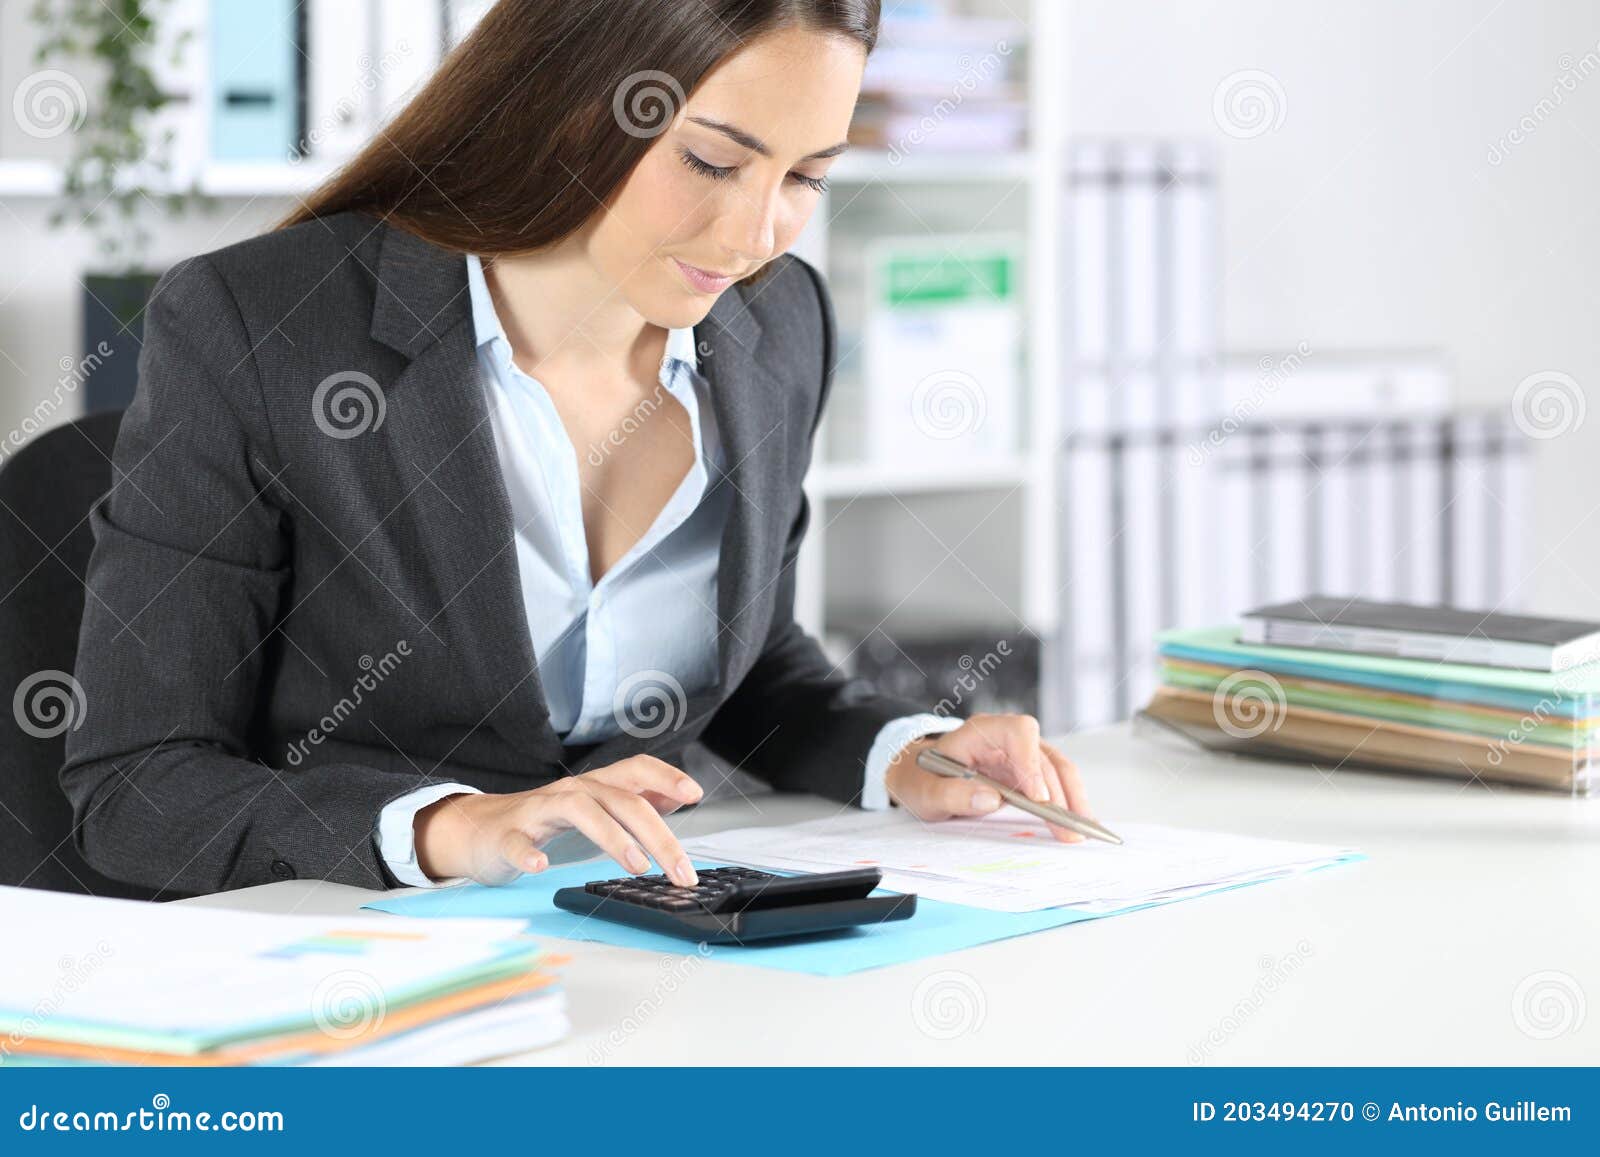 bookkeeper calculates on calculator sitting at the office